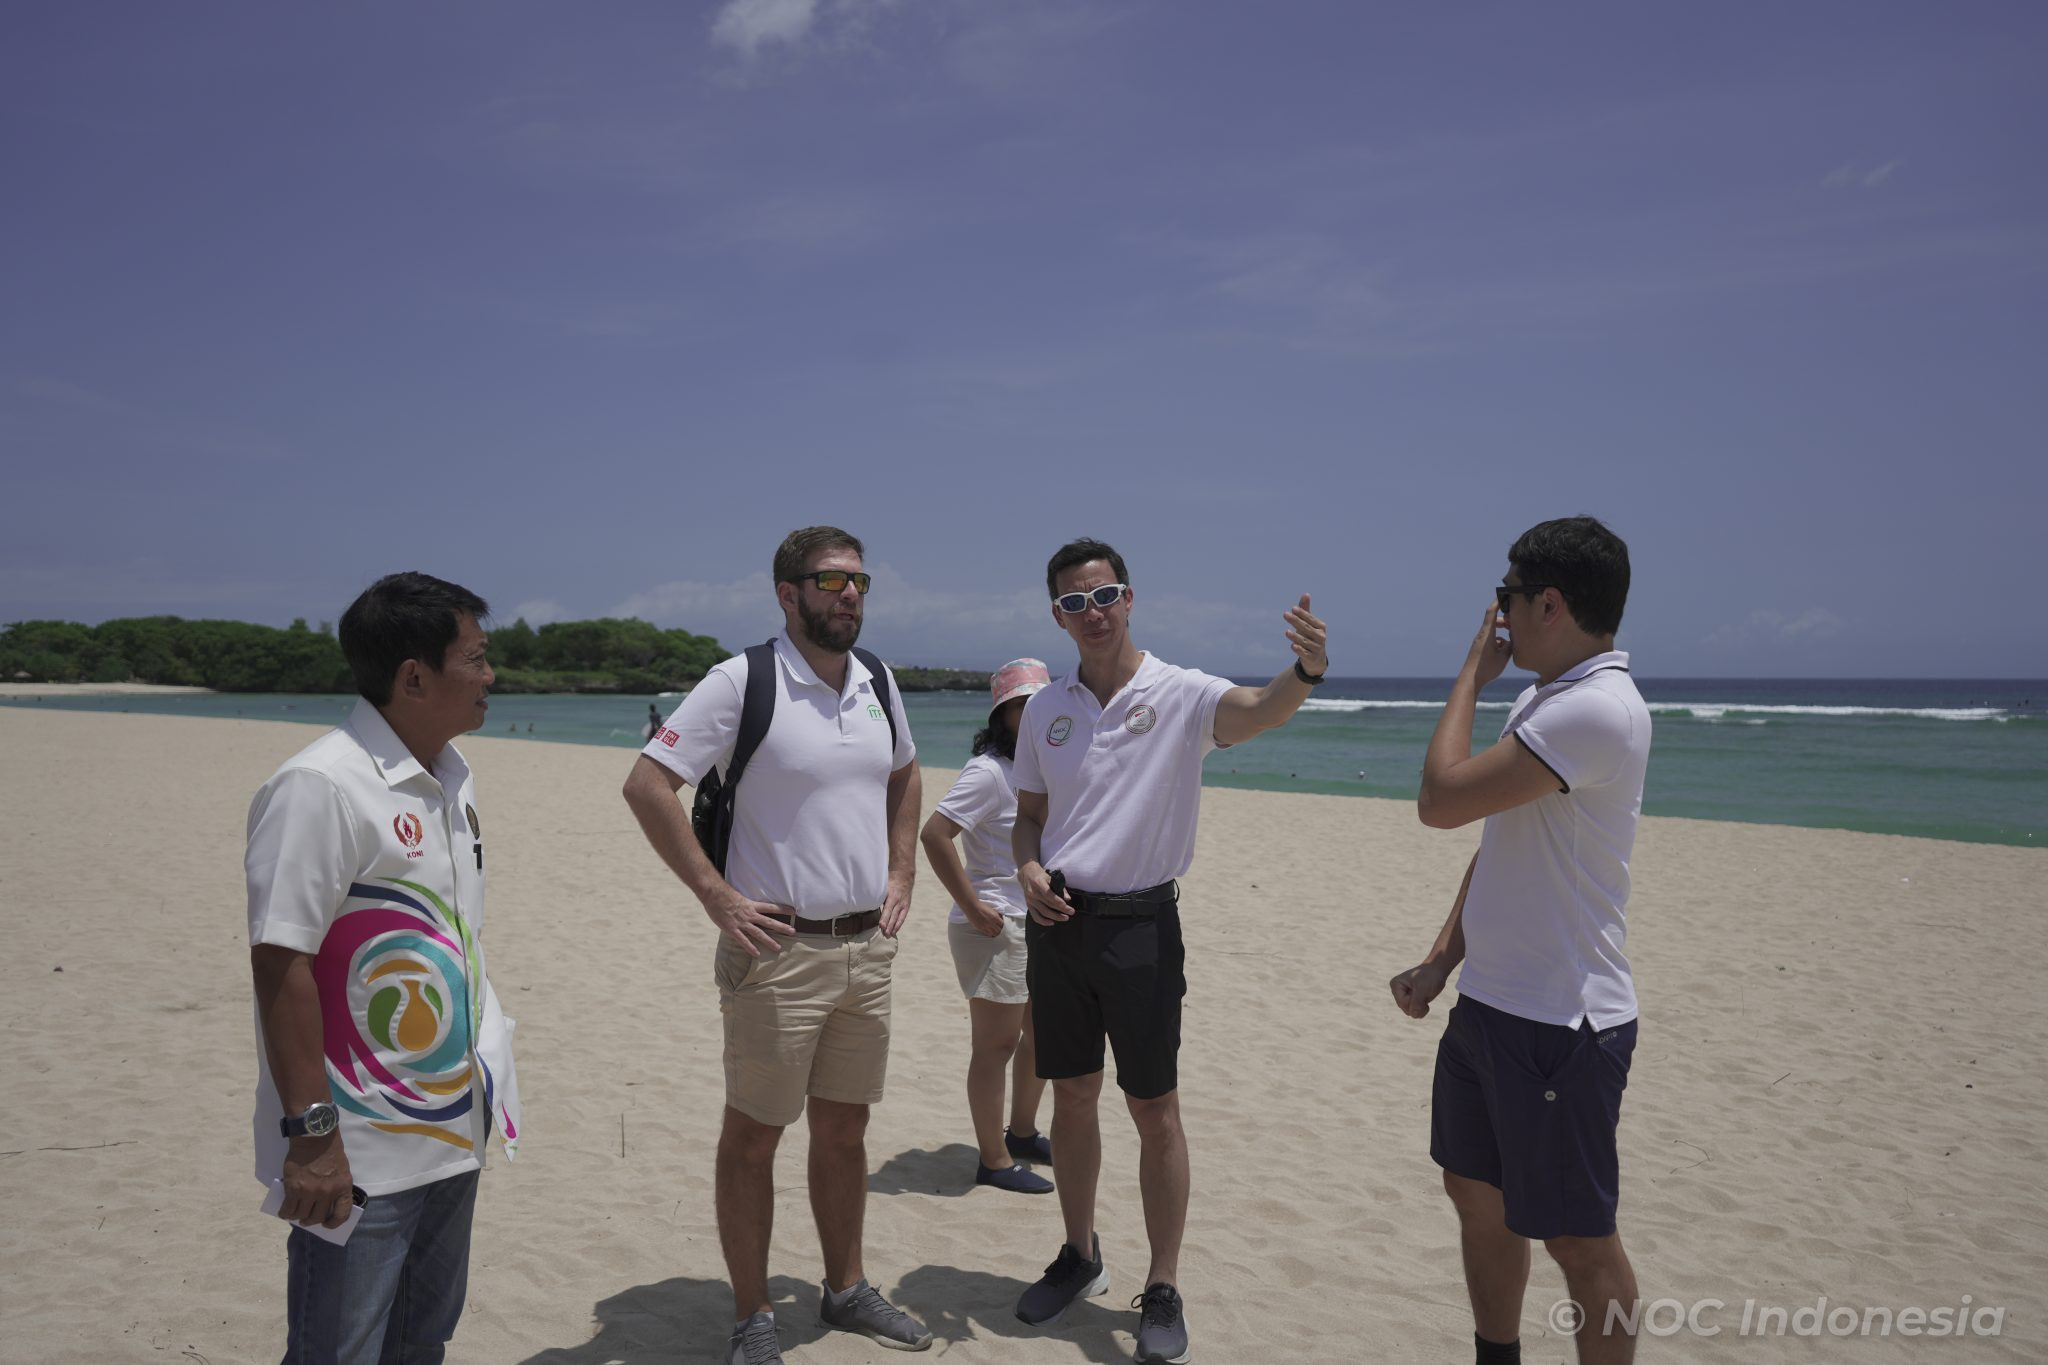 IF technical delegate meeting held in Bali 200 days before ANOC World Beach Games